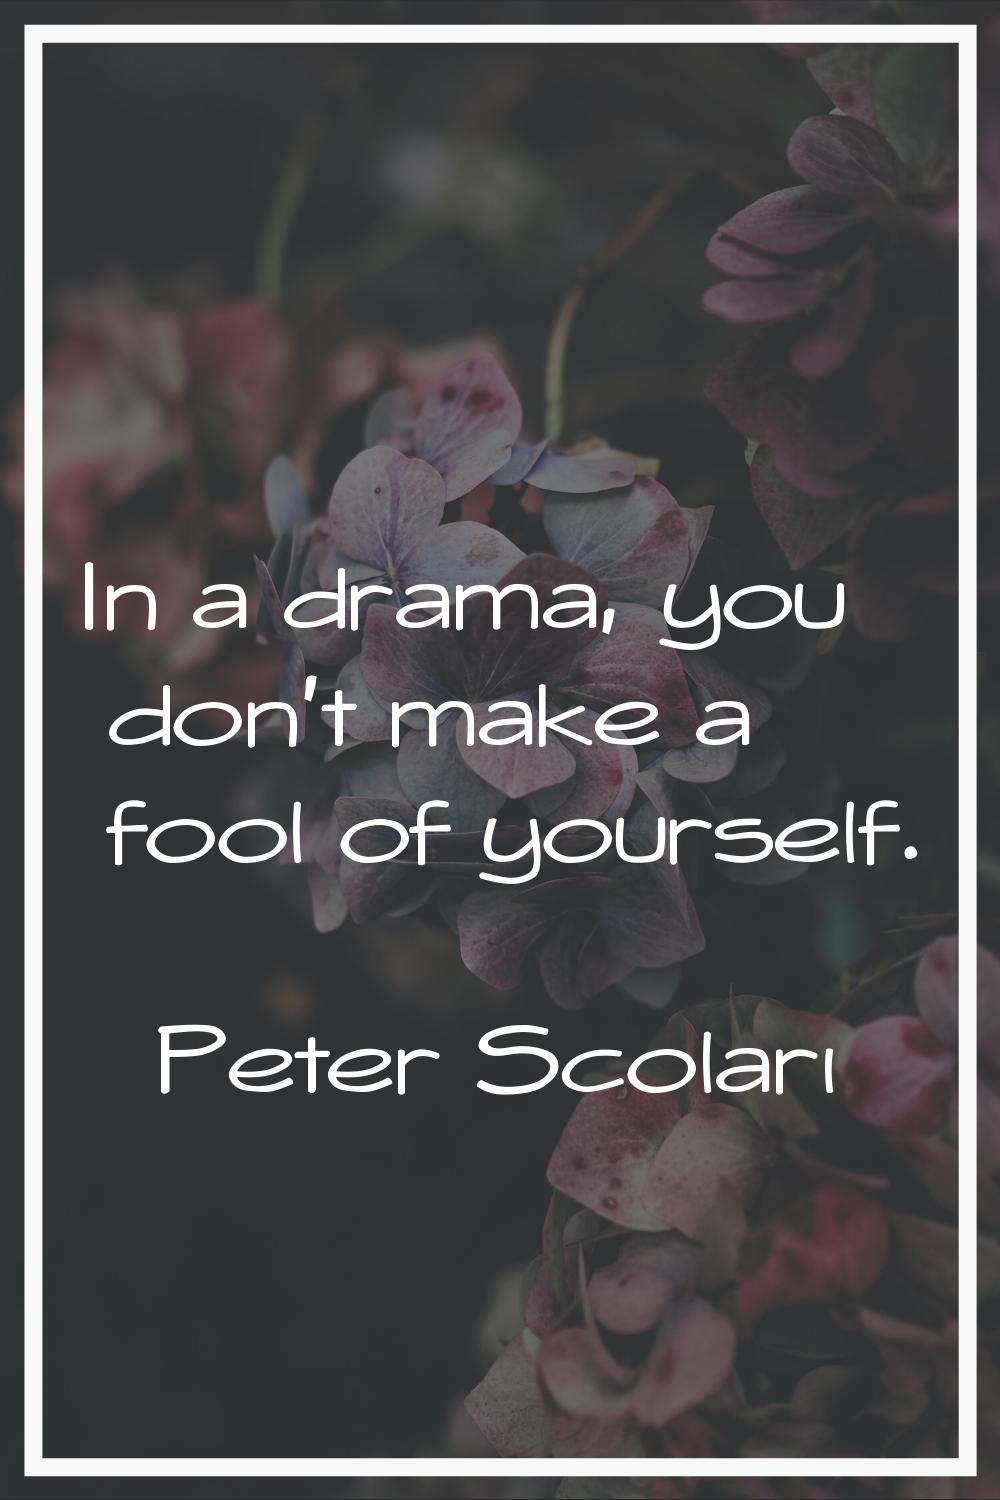 In a drama, you don't make a fool of yourself.